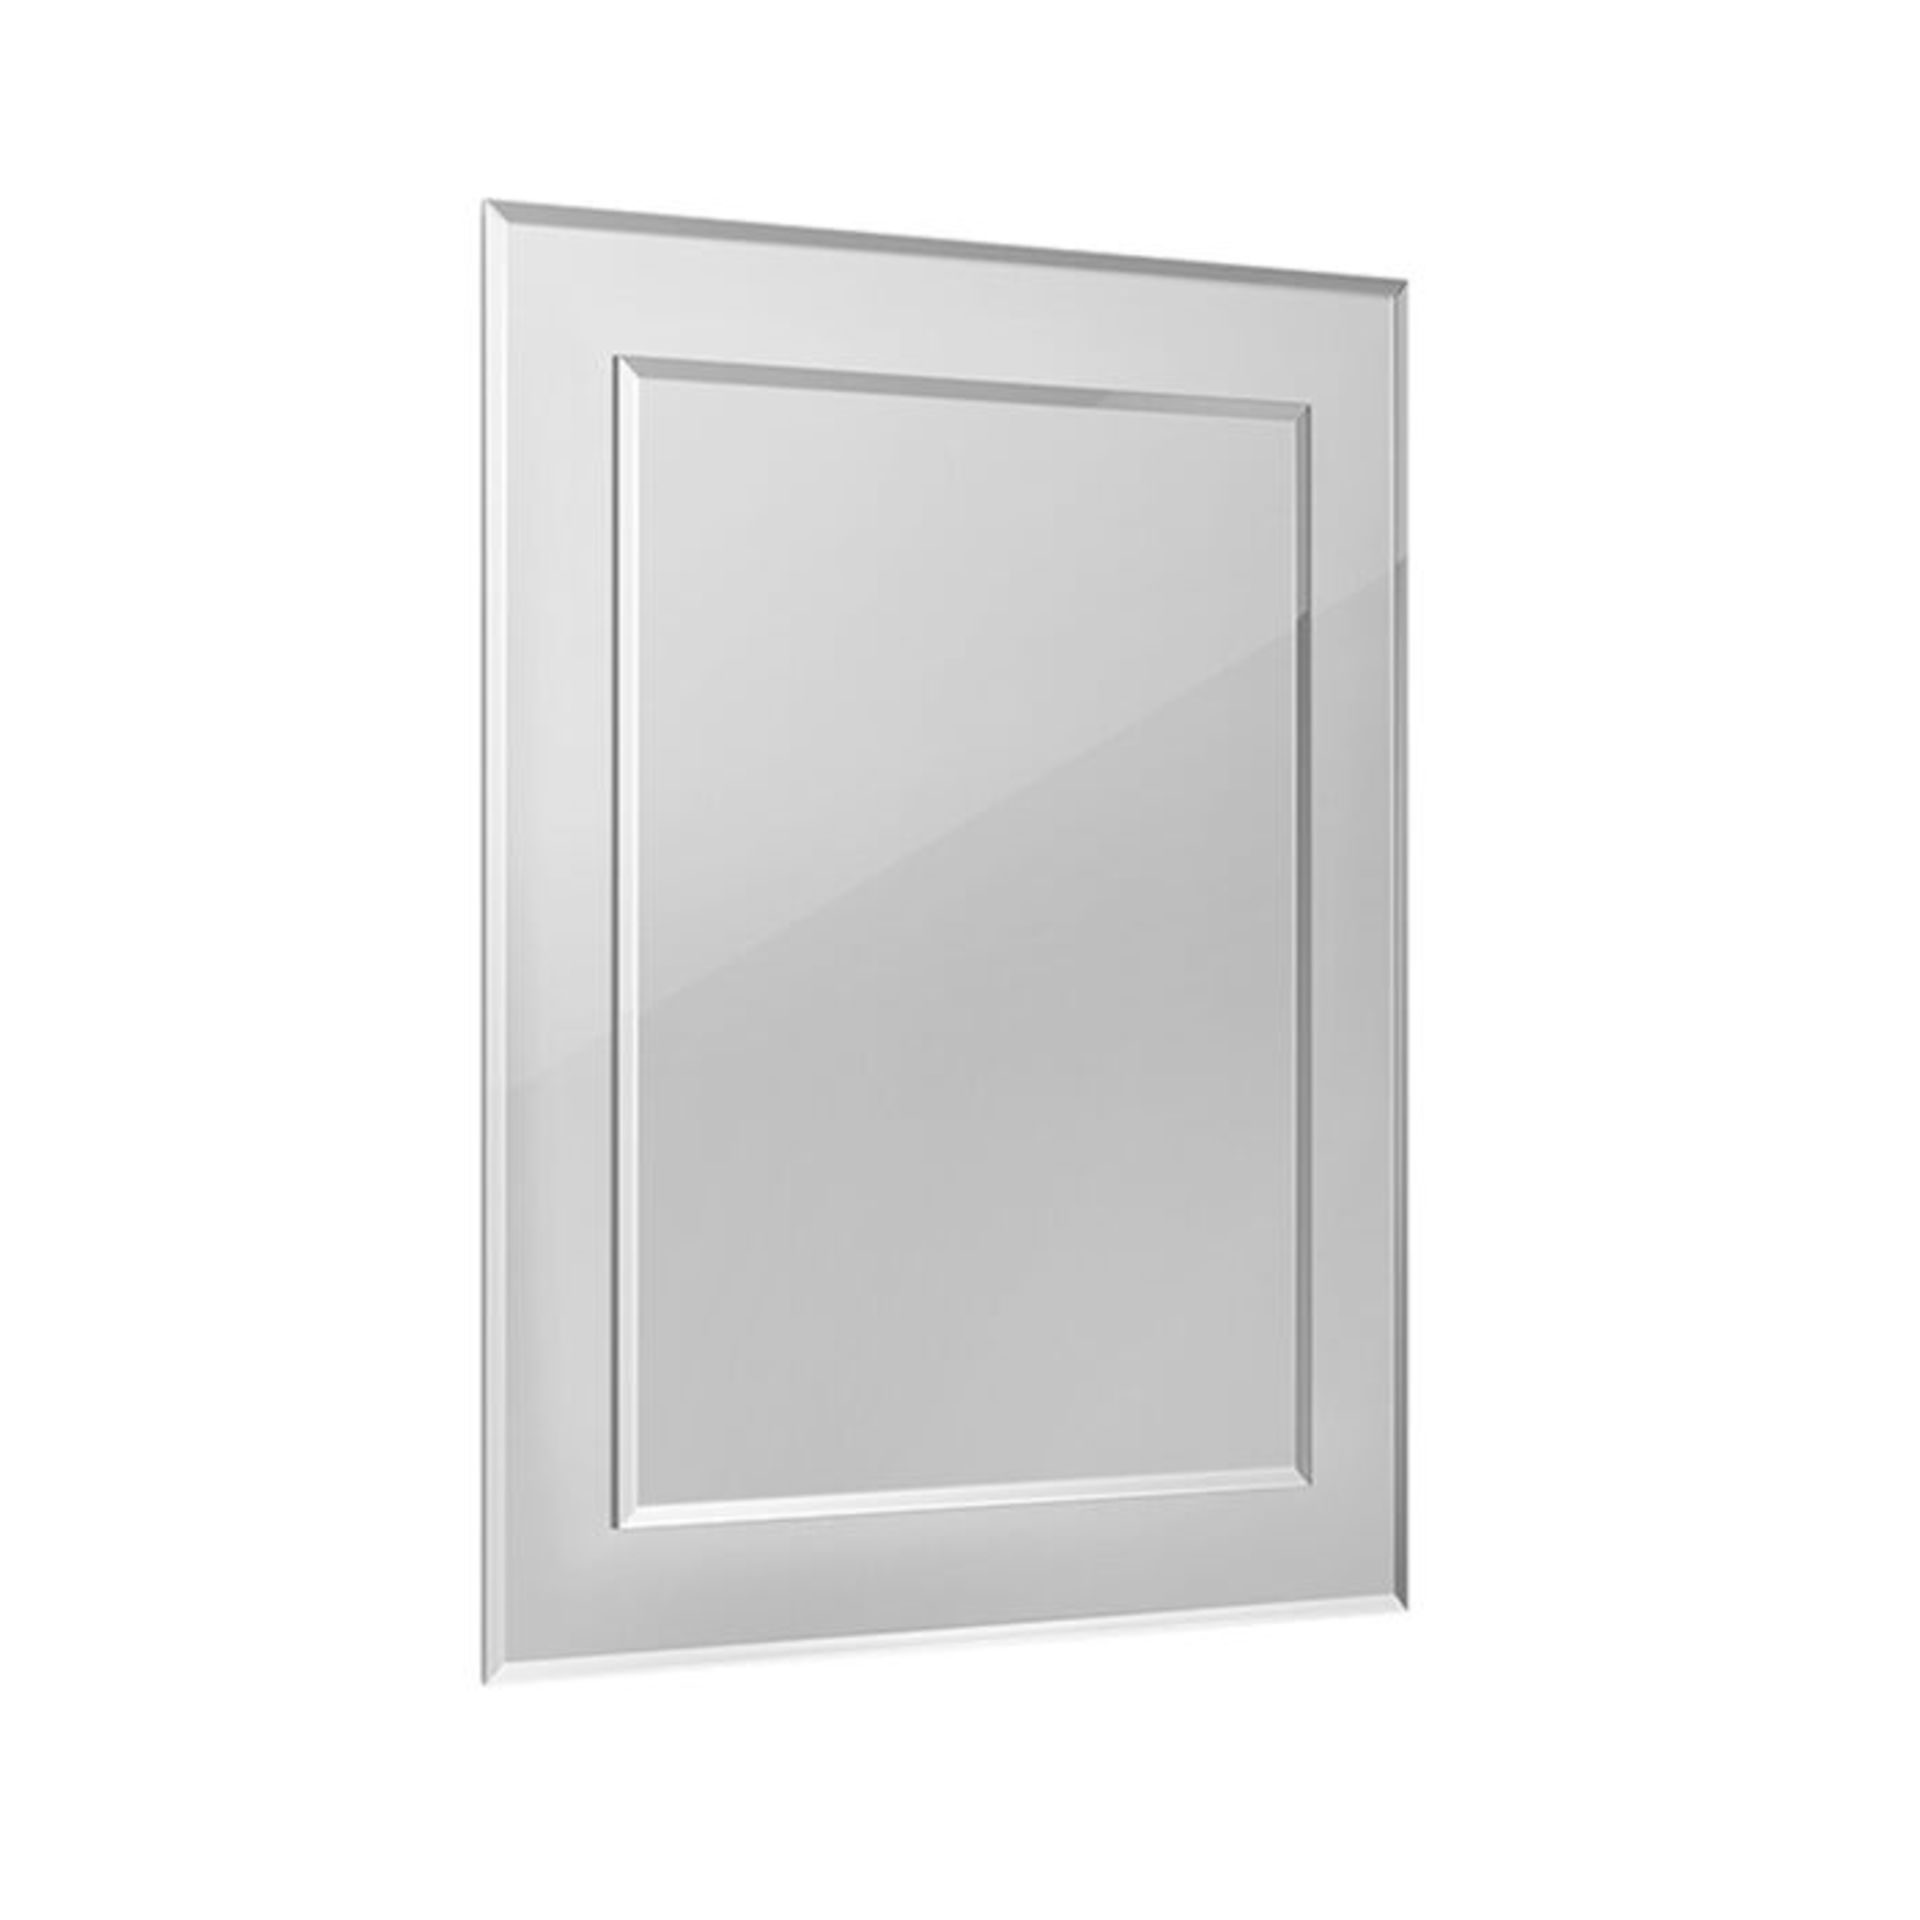 (RK198) 400x500mm Bevel Mirror. Our 400x500 Bevel Mirror offers a choice of horizontal or vert...